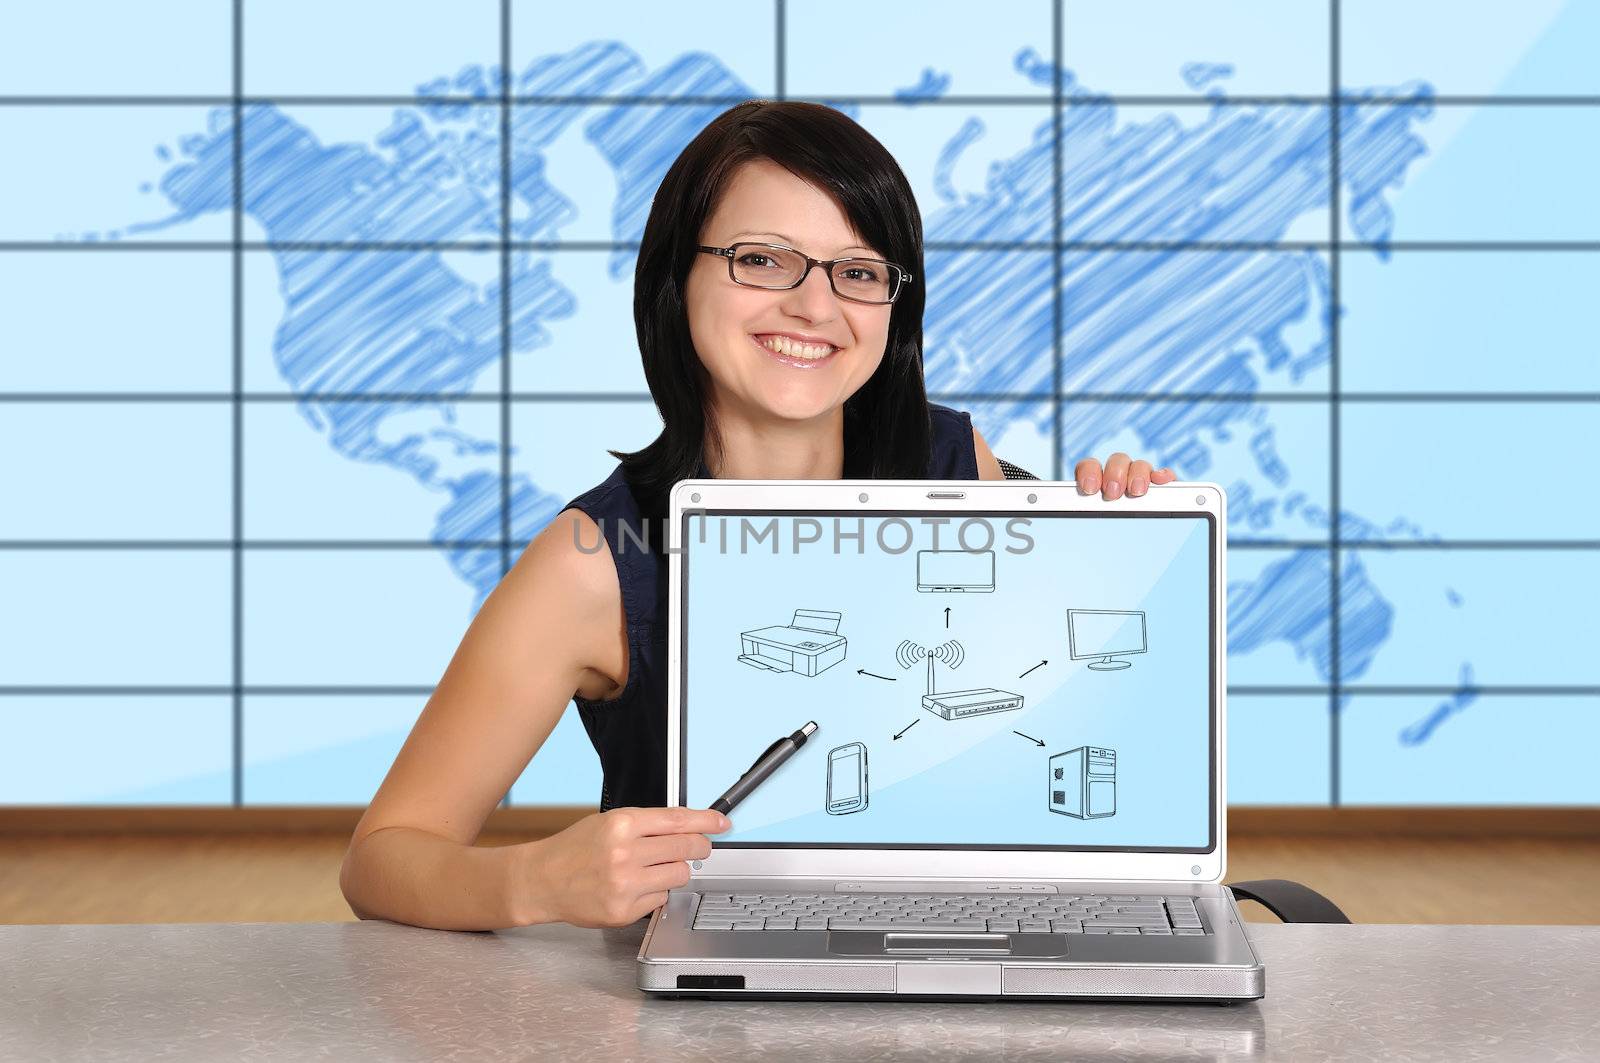 woman sitting in office and pointing to computer network